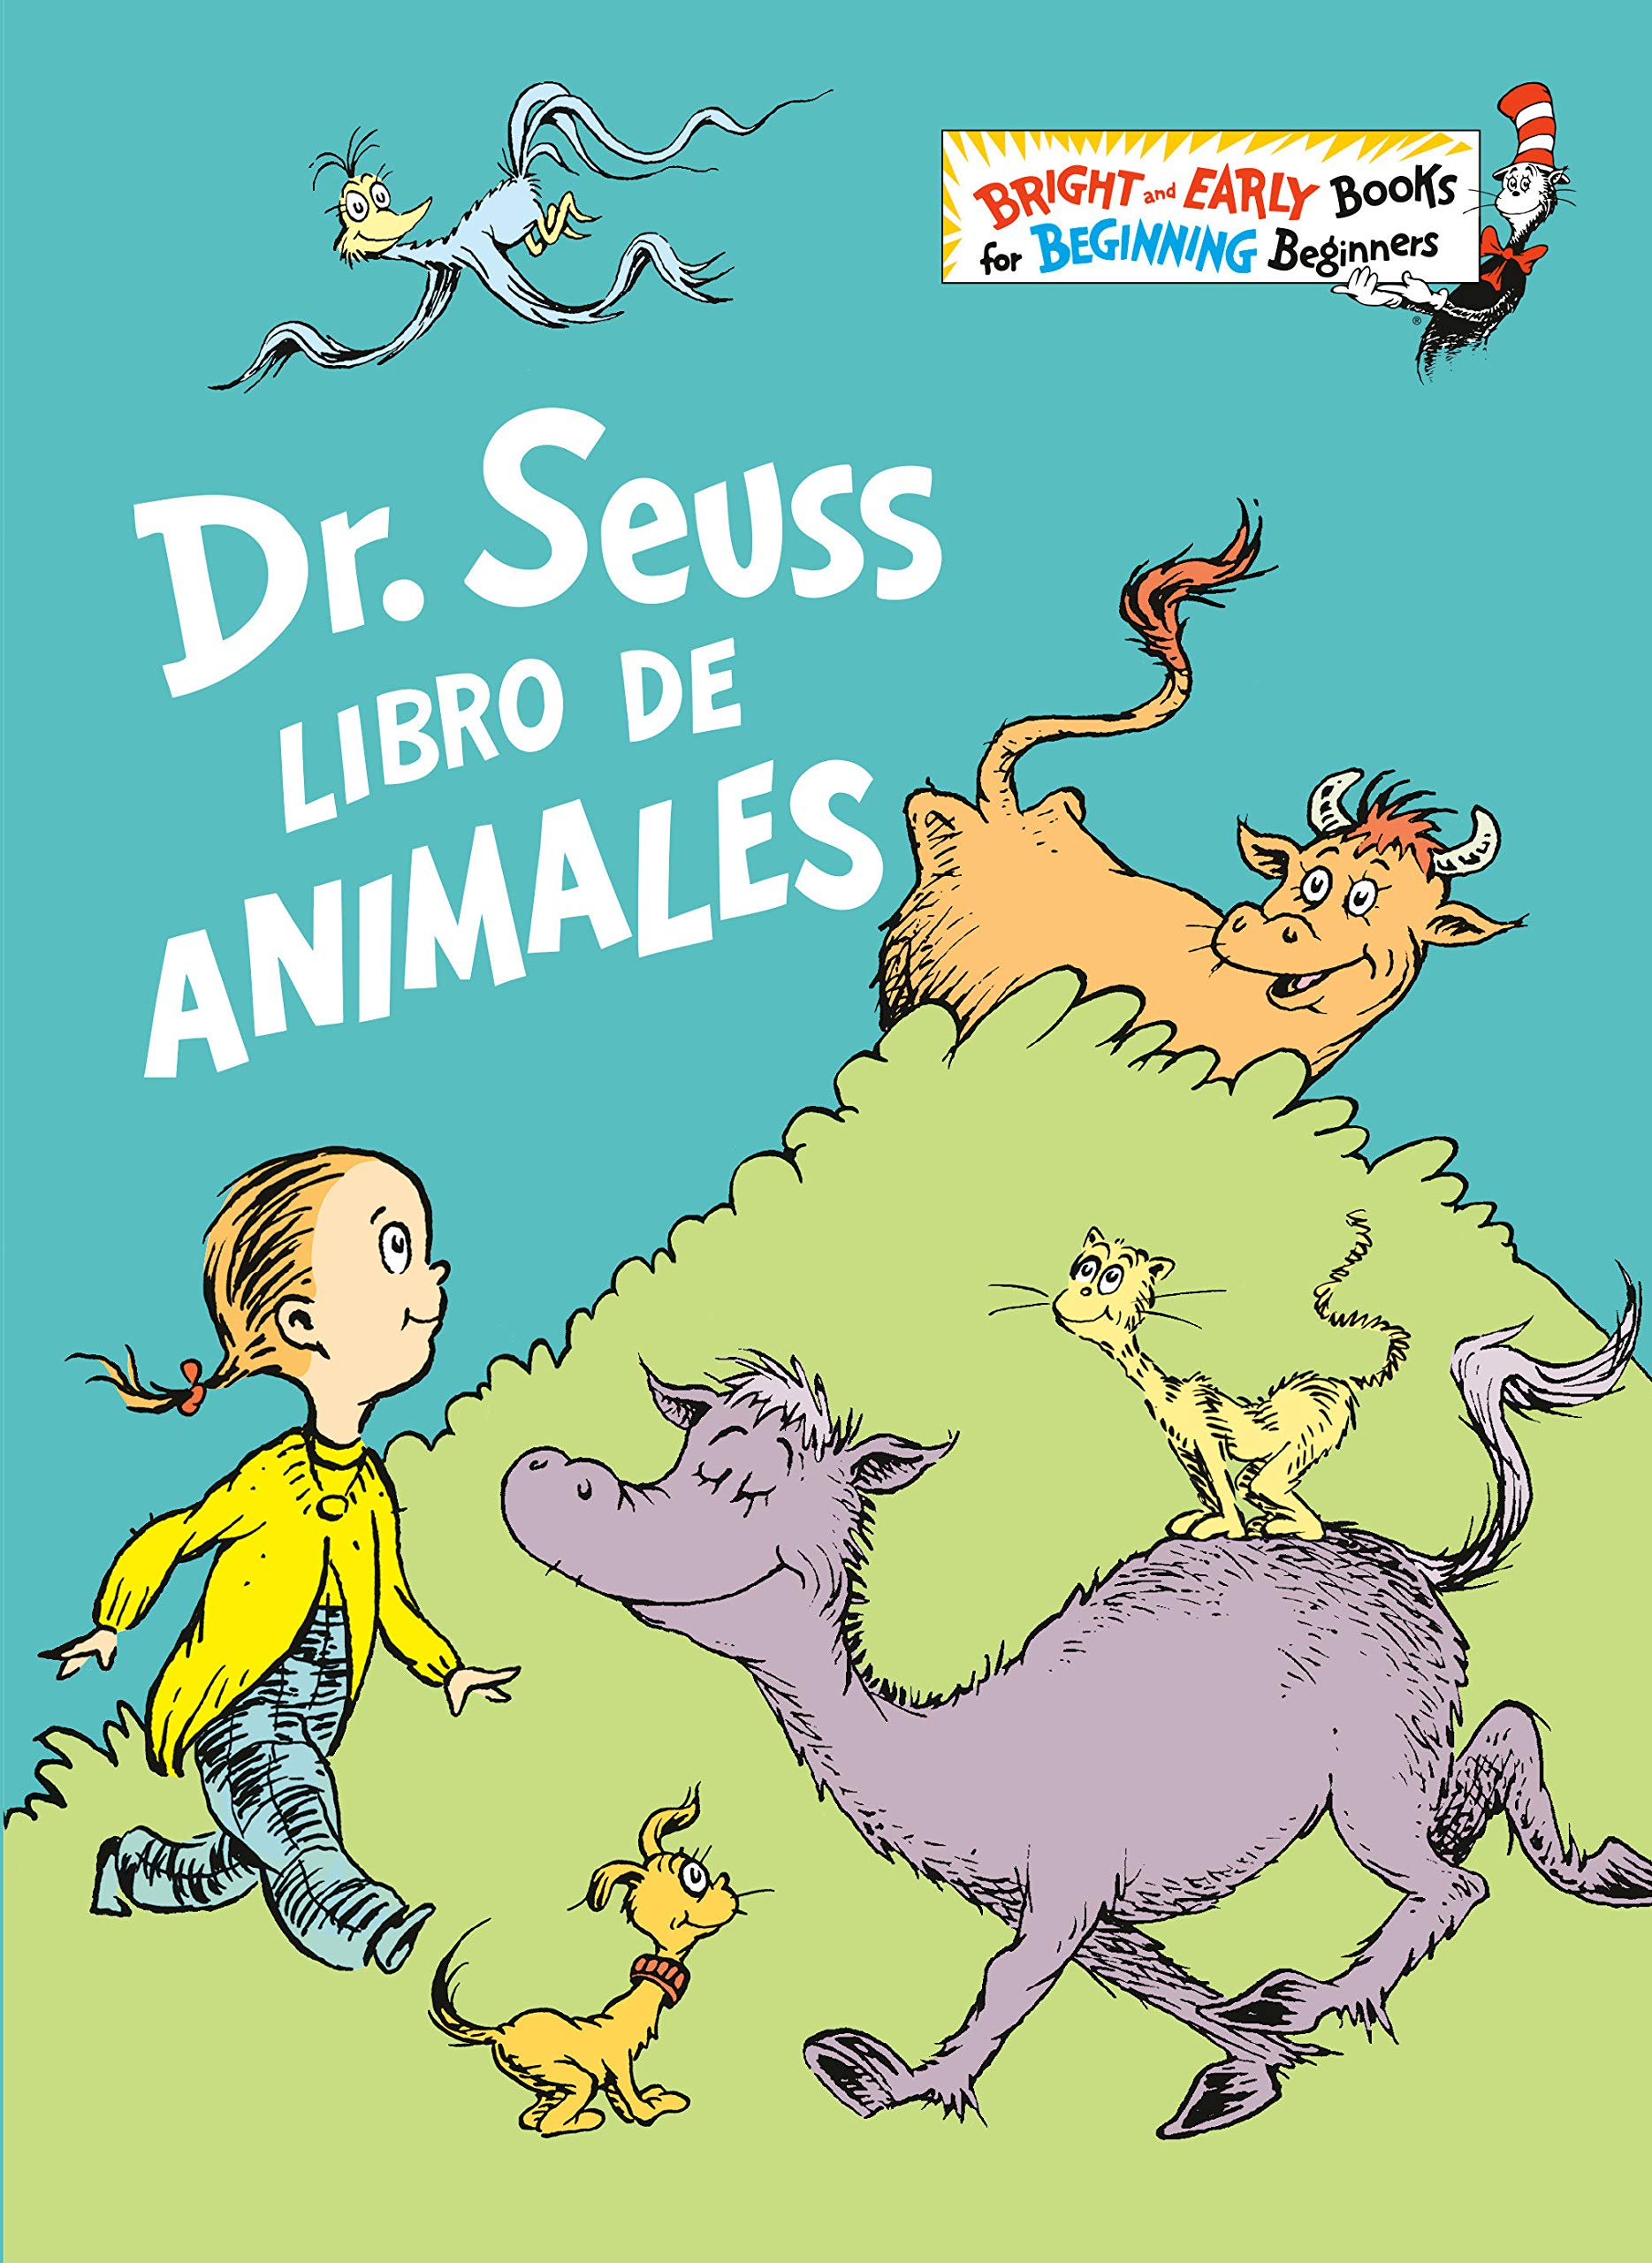 Dr. Seuss Libro de animales (Dr. Seuss's Book of Animals Spanish Edition) (Bright & Early Books(R))